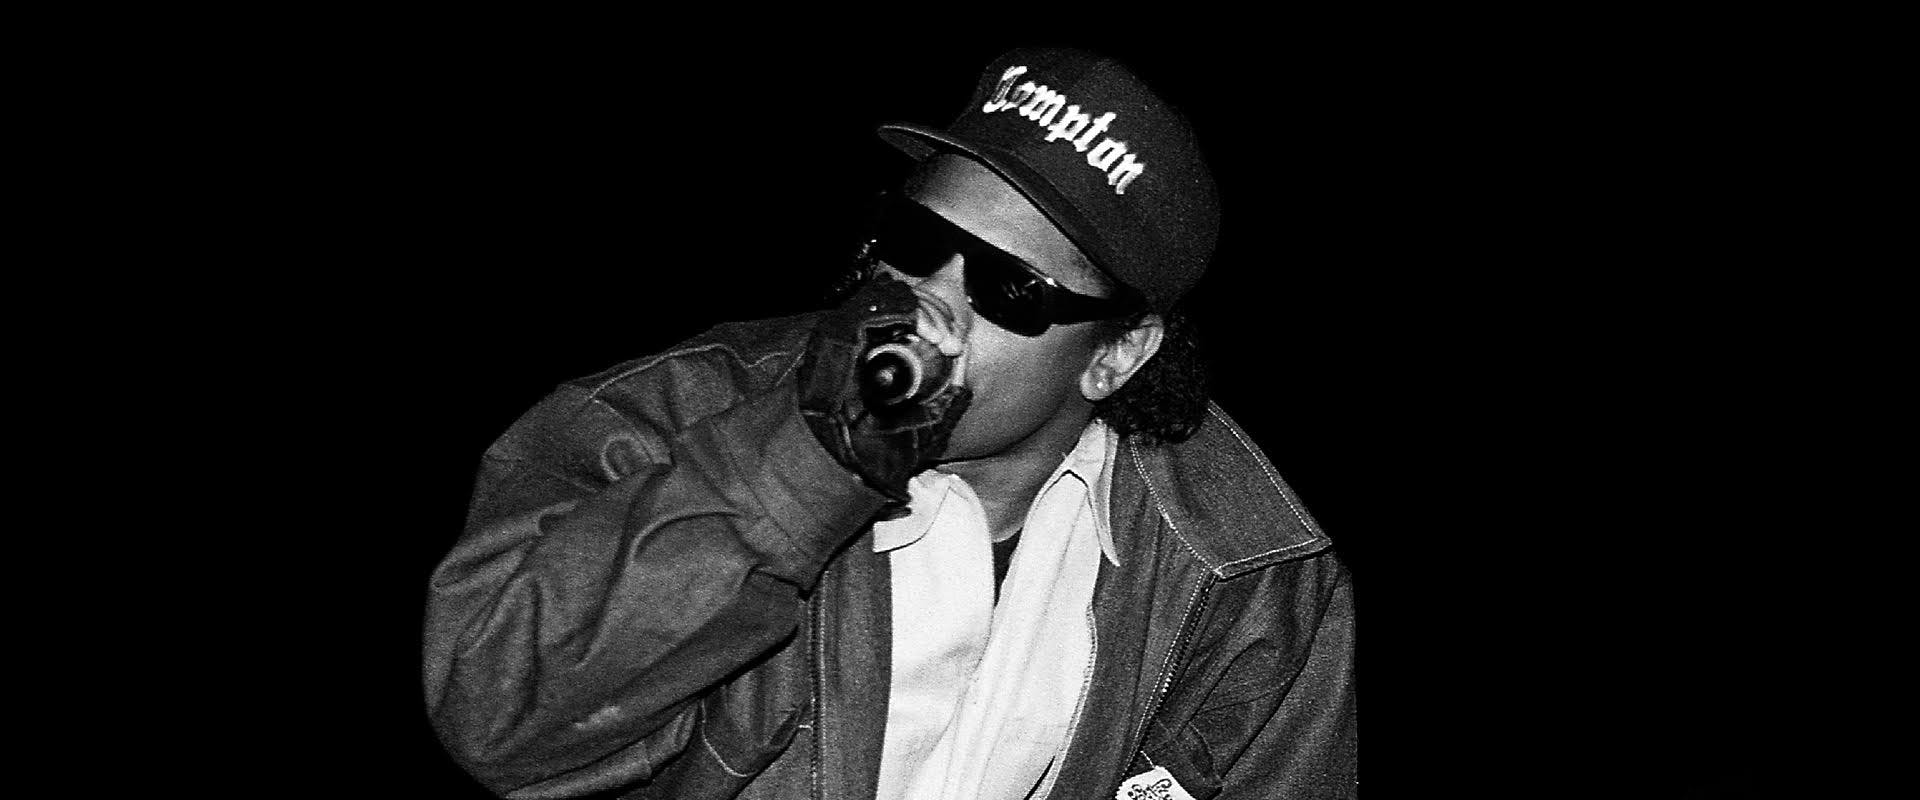 Eazy-E Has 'Reels' of Unreleased Music: 'He Had Songs With Guns N' Roses